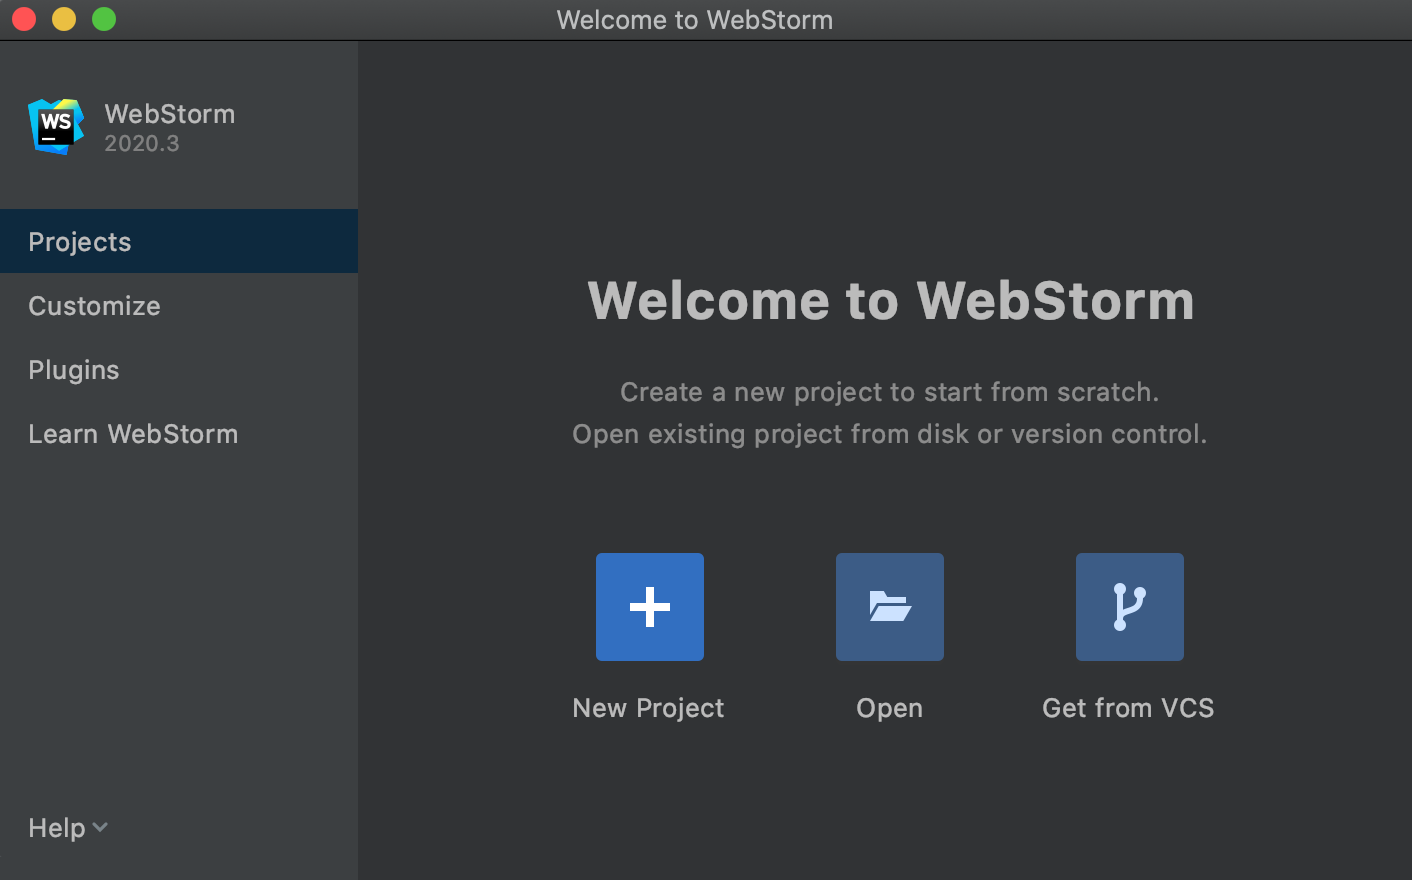 Open, check out, and create projects from the Welcome screen